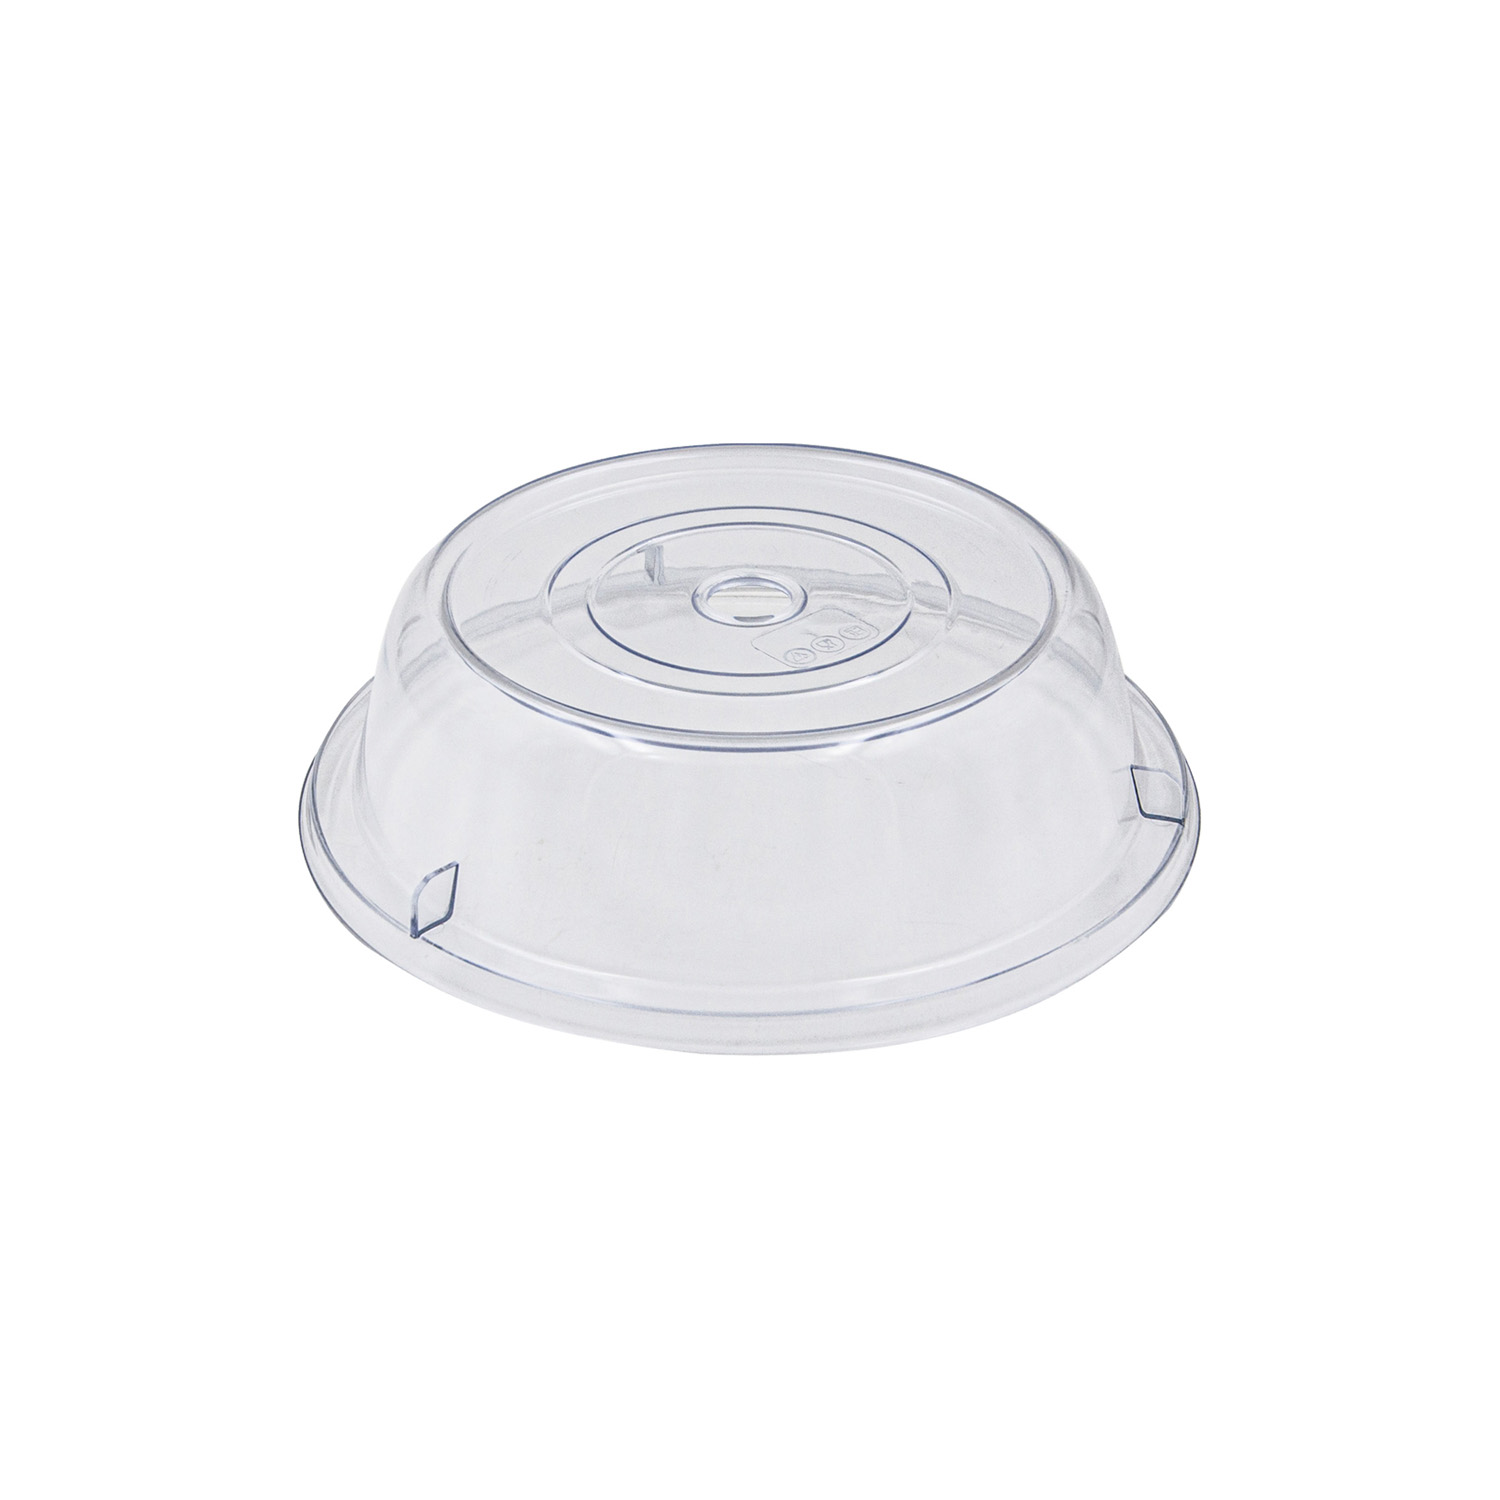 CAC China PPCO-16 Clear Polycarbonate Round Plate Cover 10"Dia